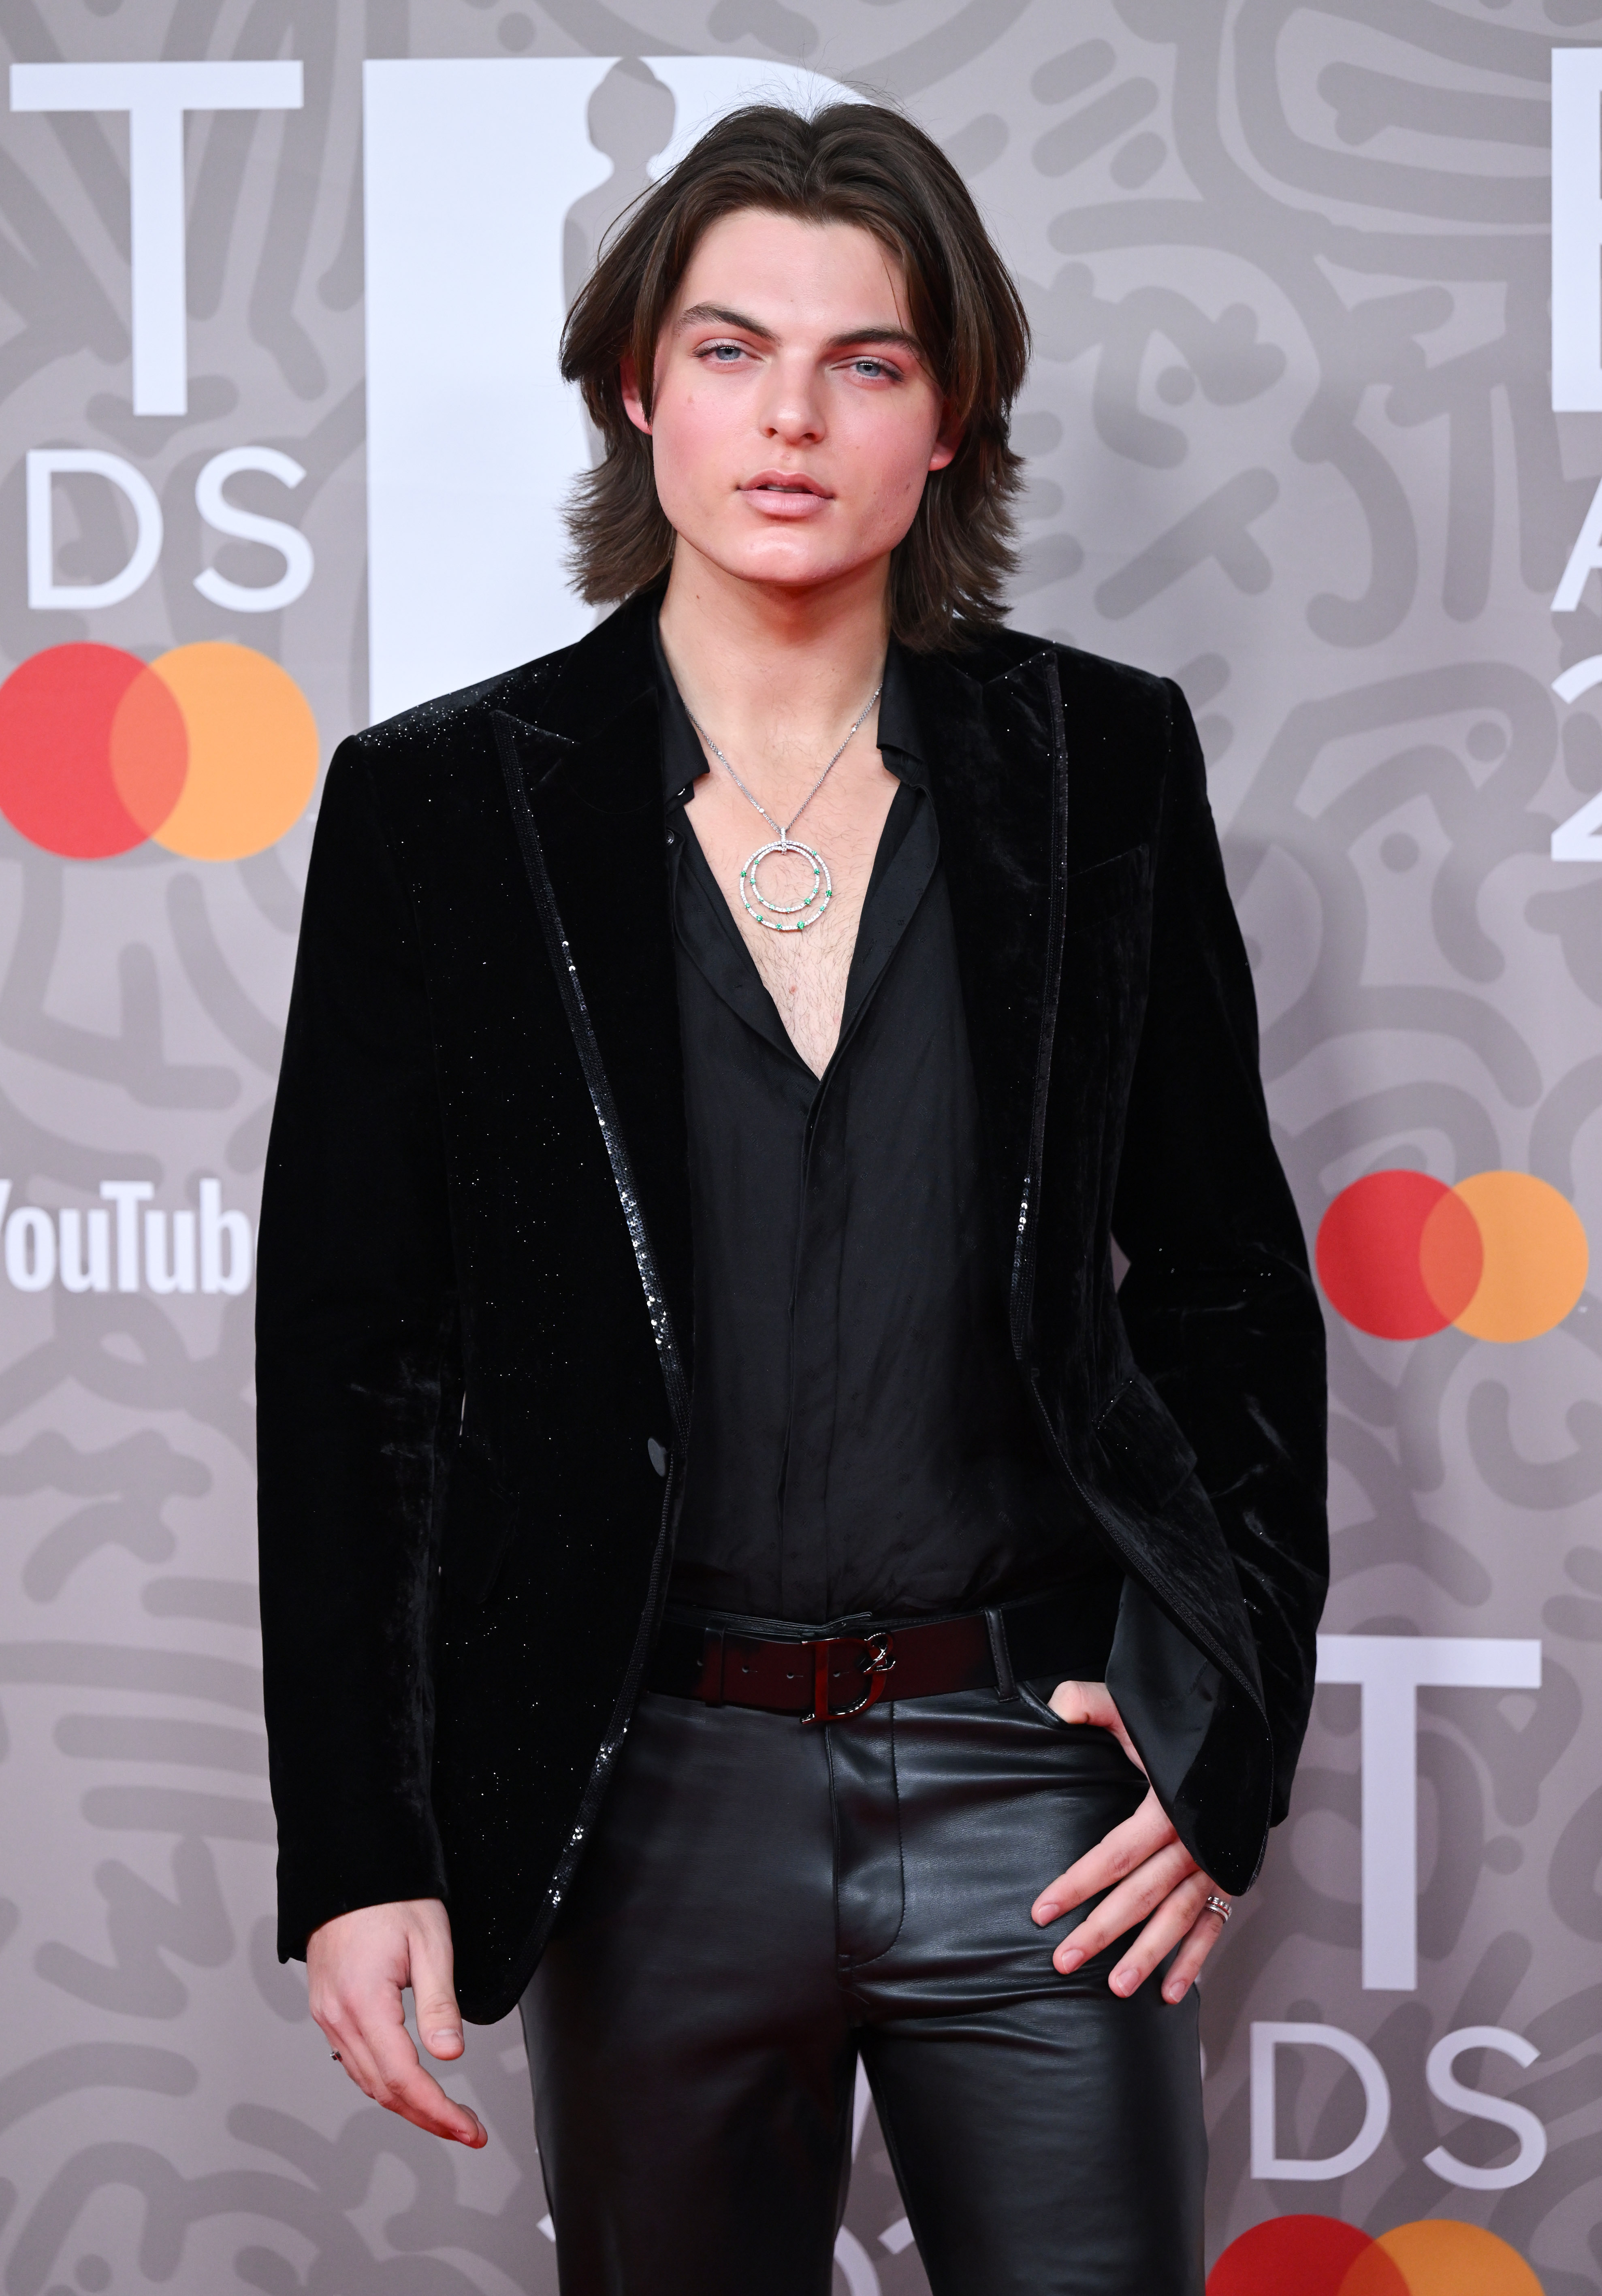 Damian Hurley during The BRIT Awards 2023 at The O2 Arena on February 11, 2023, in London, England. | Source: Getty Images